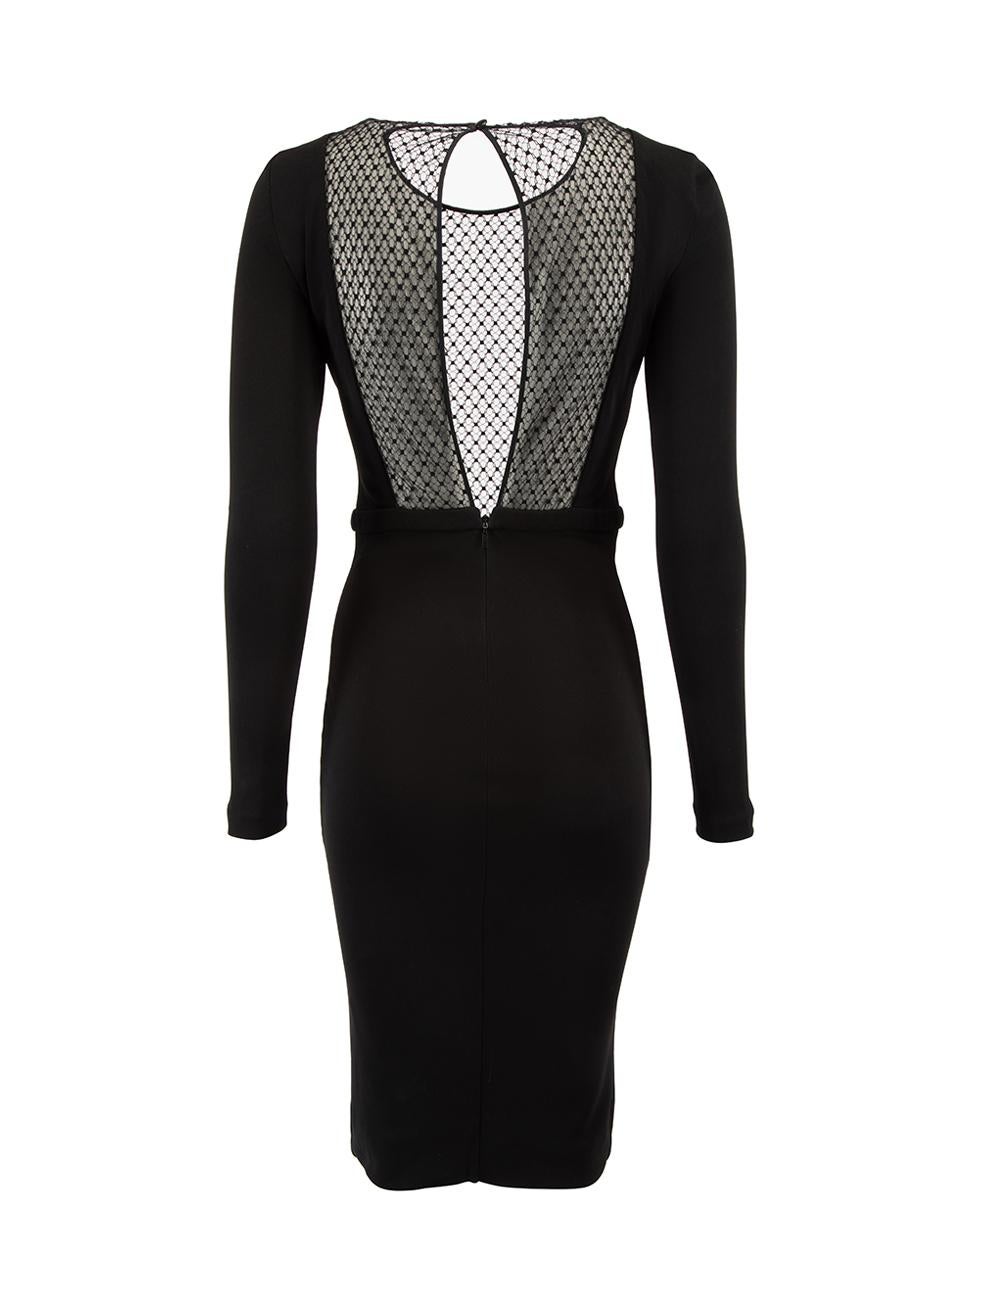 Gucci Women's Black Mesh Panel Long Sleeve Dress In Excellent Condition For Sale In London, GB